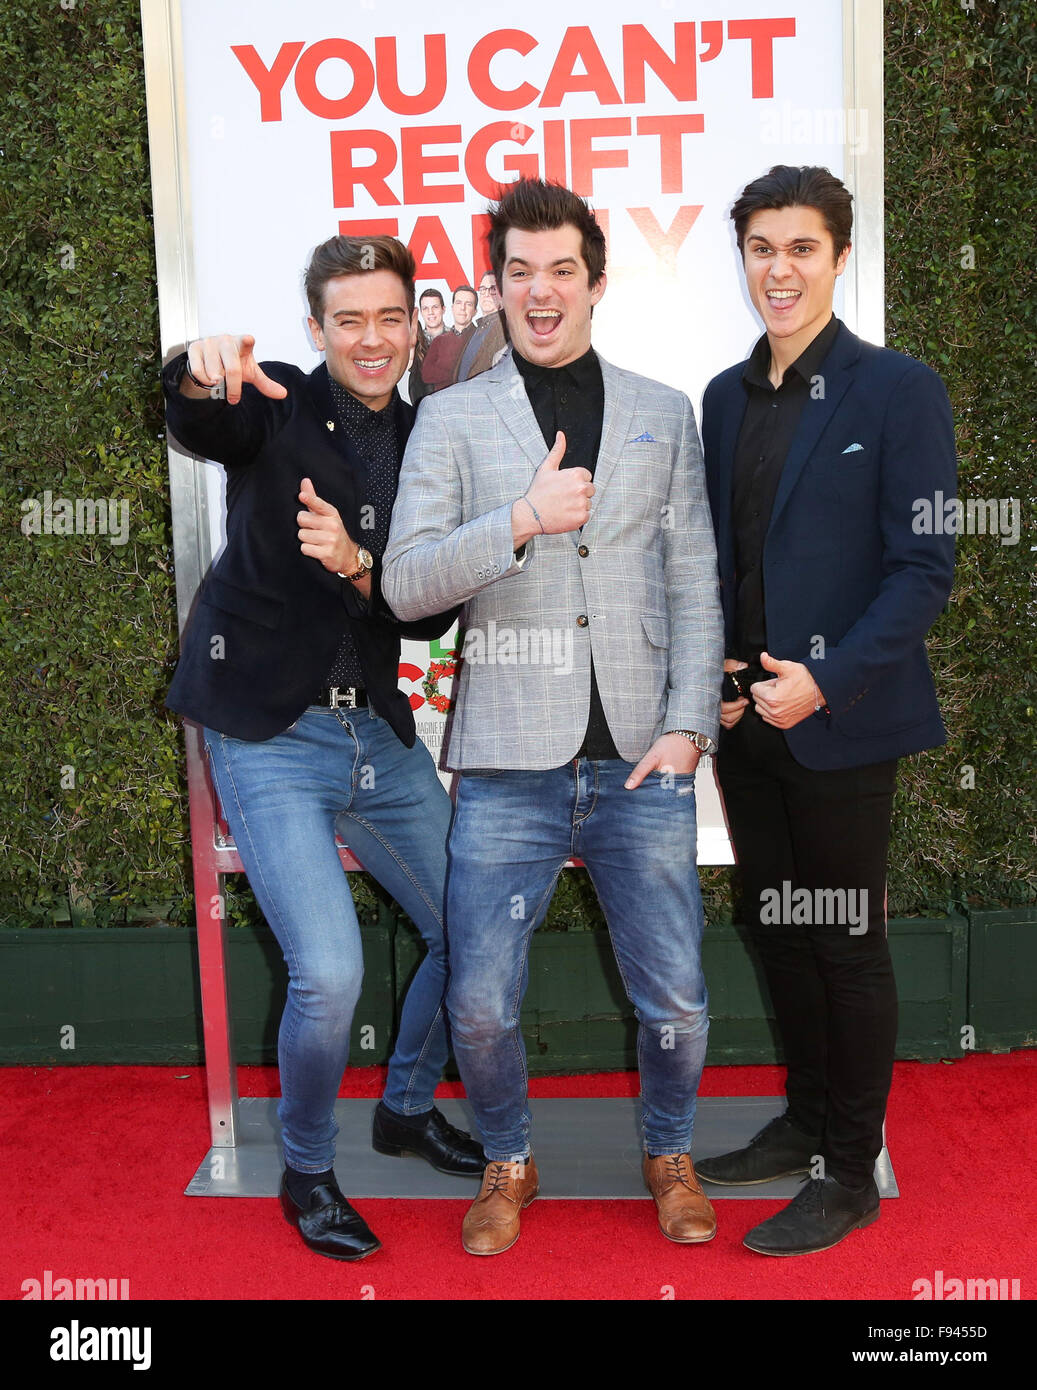 Celebrities attend the premiere of CBS Films 'Love The Coopers' at the Park Plaza at The Grove.  Featuring: Kristofer James, Kyle Carpenter and Aleskey Lopez, The Scheme Where: Los Angeles, California, United States When: 12 Nov 2015 Stock Photo